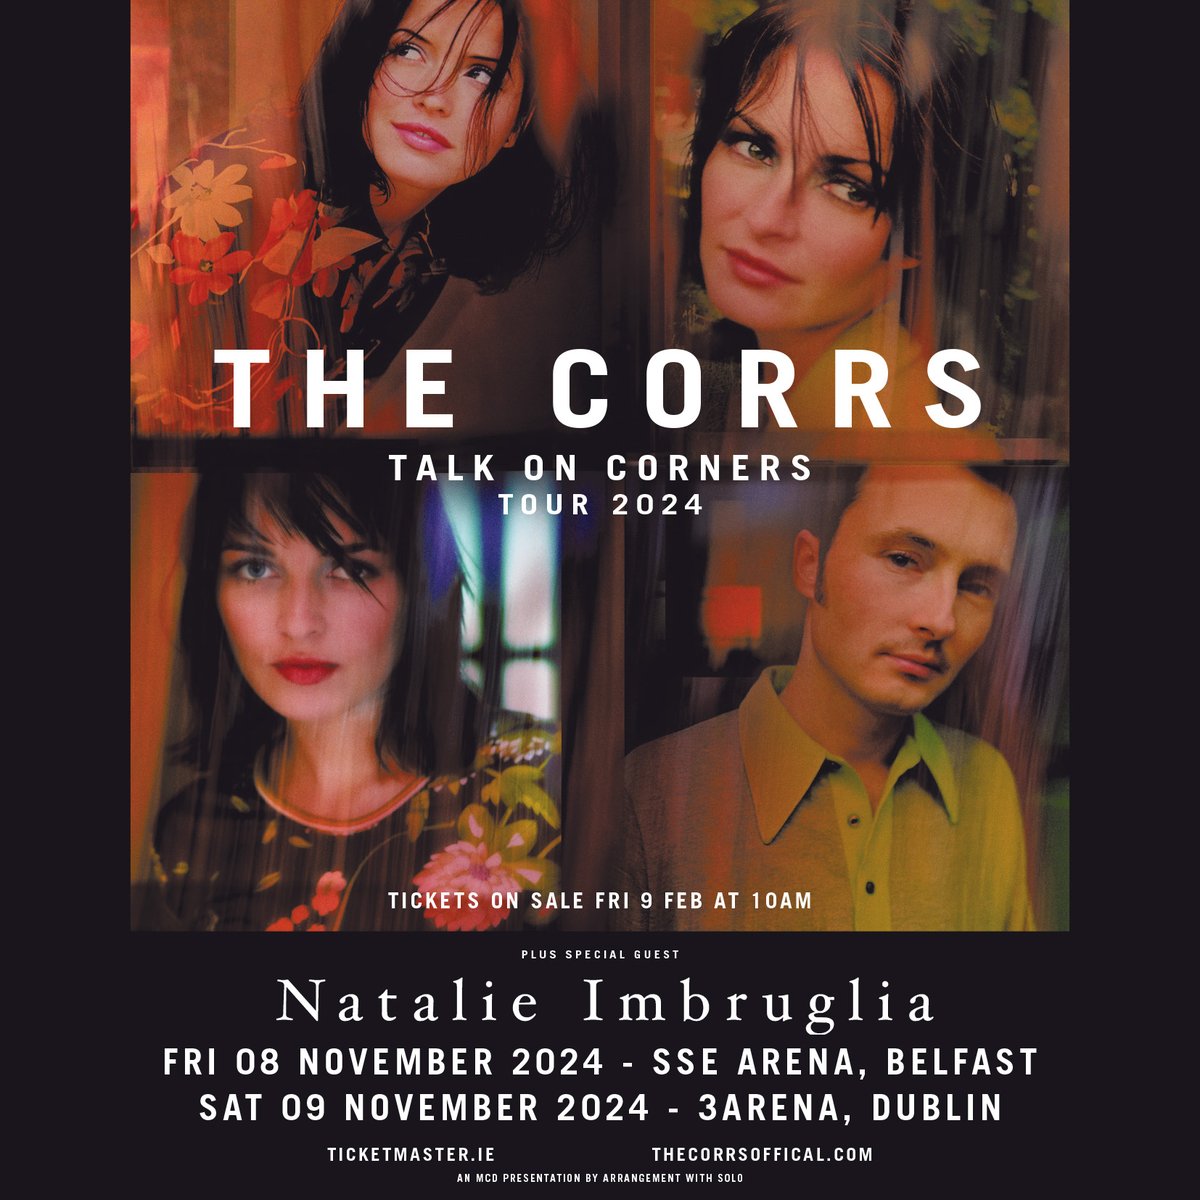 ⭐️ Tickets for @CorrsOfficial plus special guest Natalie Imbruglia in Dublin & Belfast this November are now on sale! 💫 🎟️ BOOK NOW at bit.ly/The-Corrs-TM